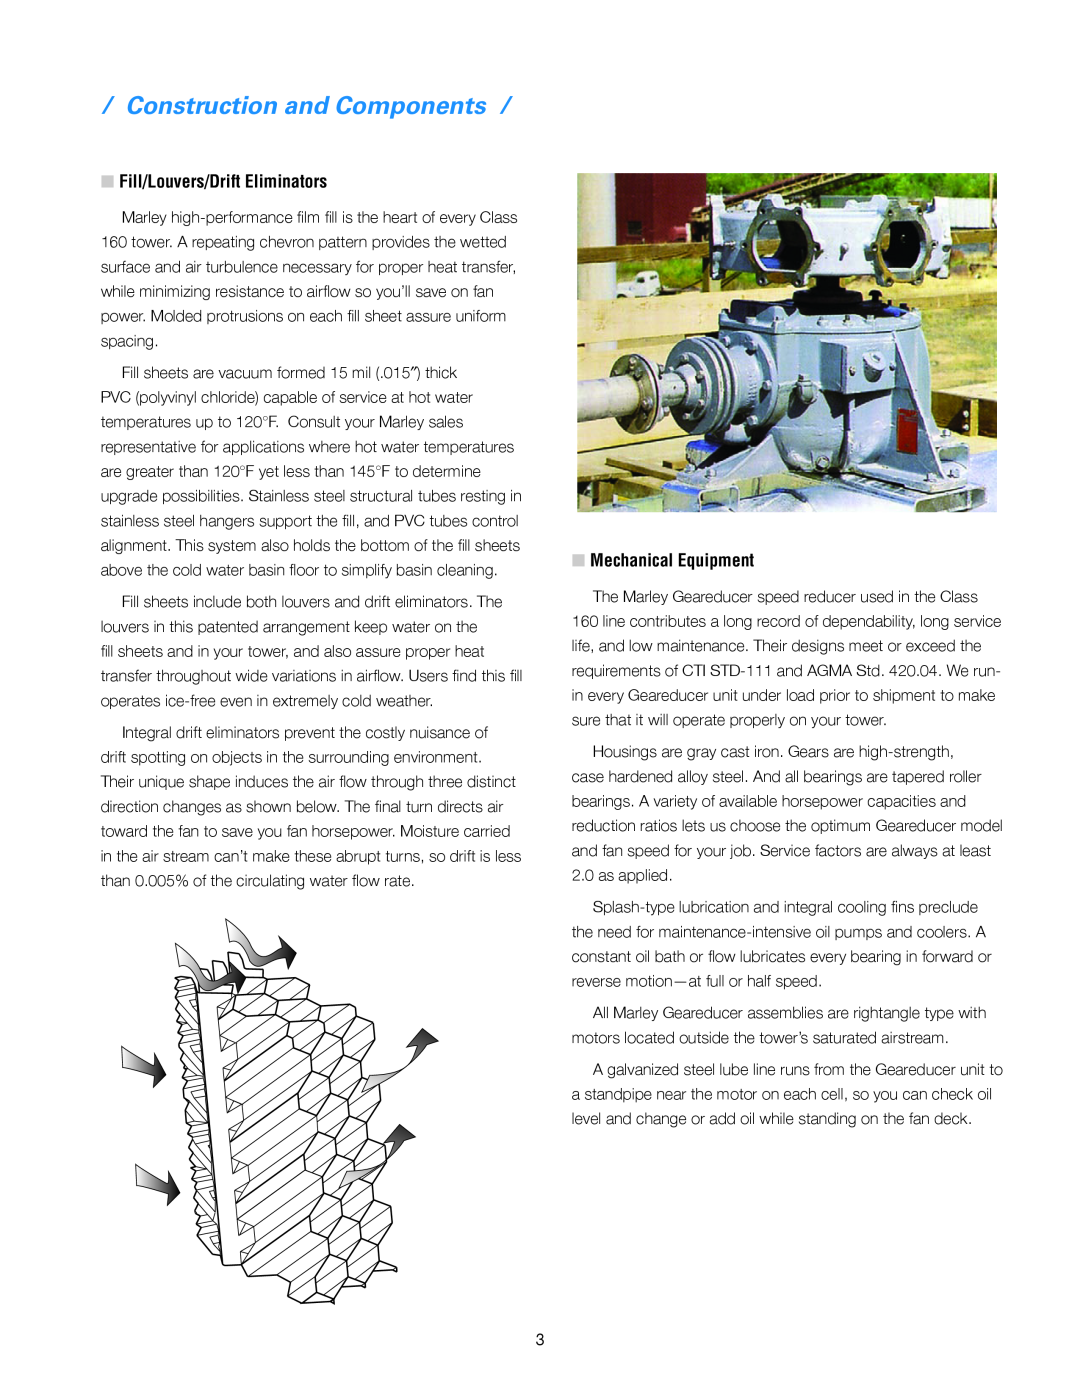 SPX Cooling Technologies 160 manual Construction and Components, Fill/Louvers/Drift Eliminators, Mechanical Equipment 